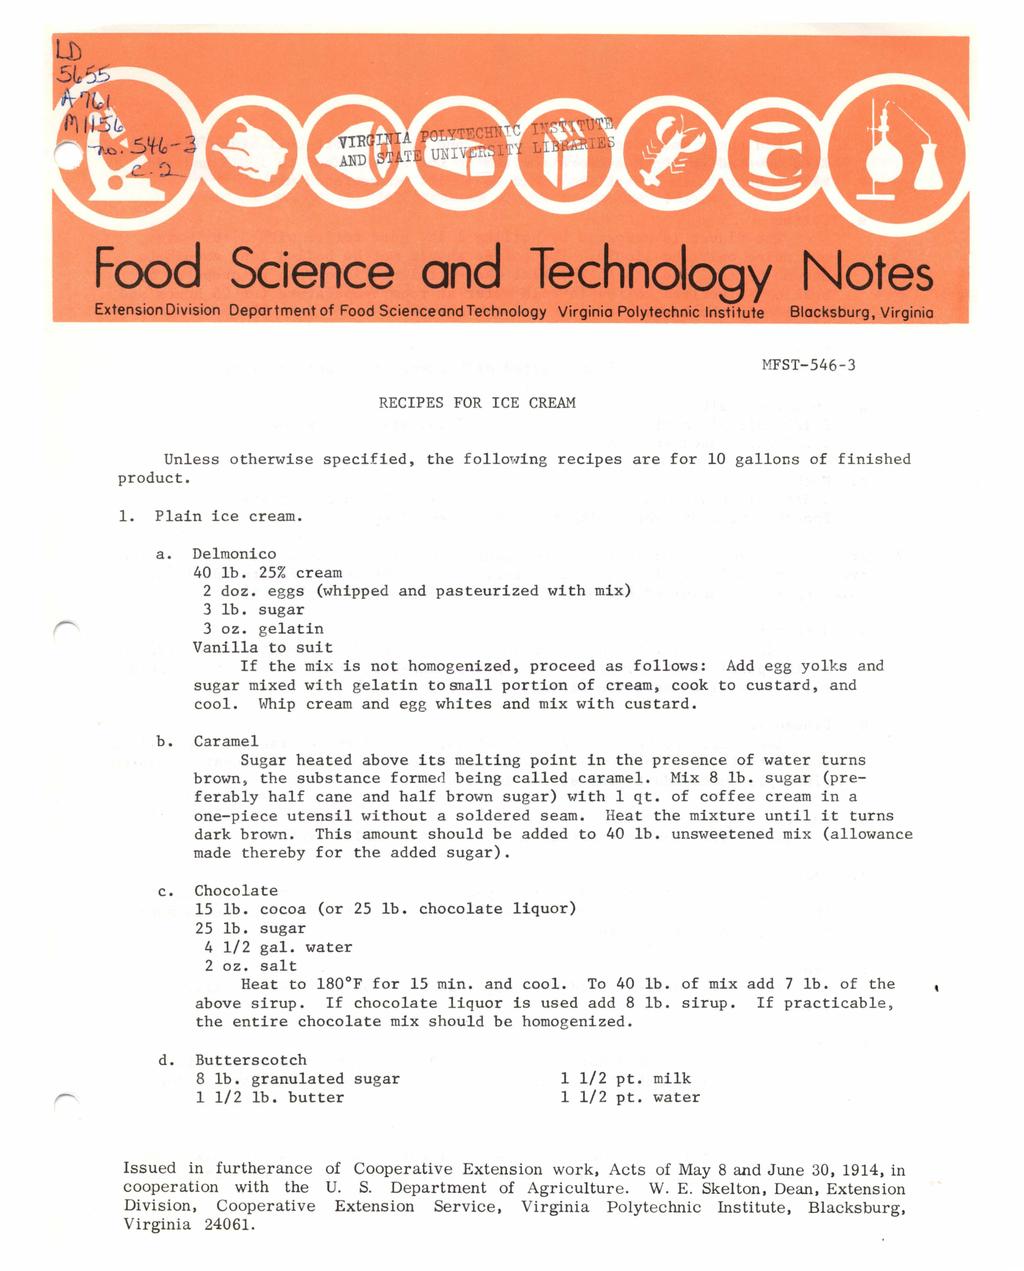 Food Science and Technology Notes Extension Division Deportment of Food Science and Technology Virginia Polytechnic Institute Blacksburg, Virginia RECIPES FOR ICE CREAM NFST-546-3 Unless otherwise